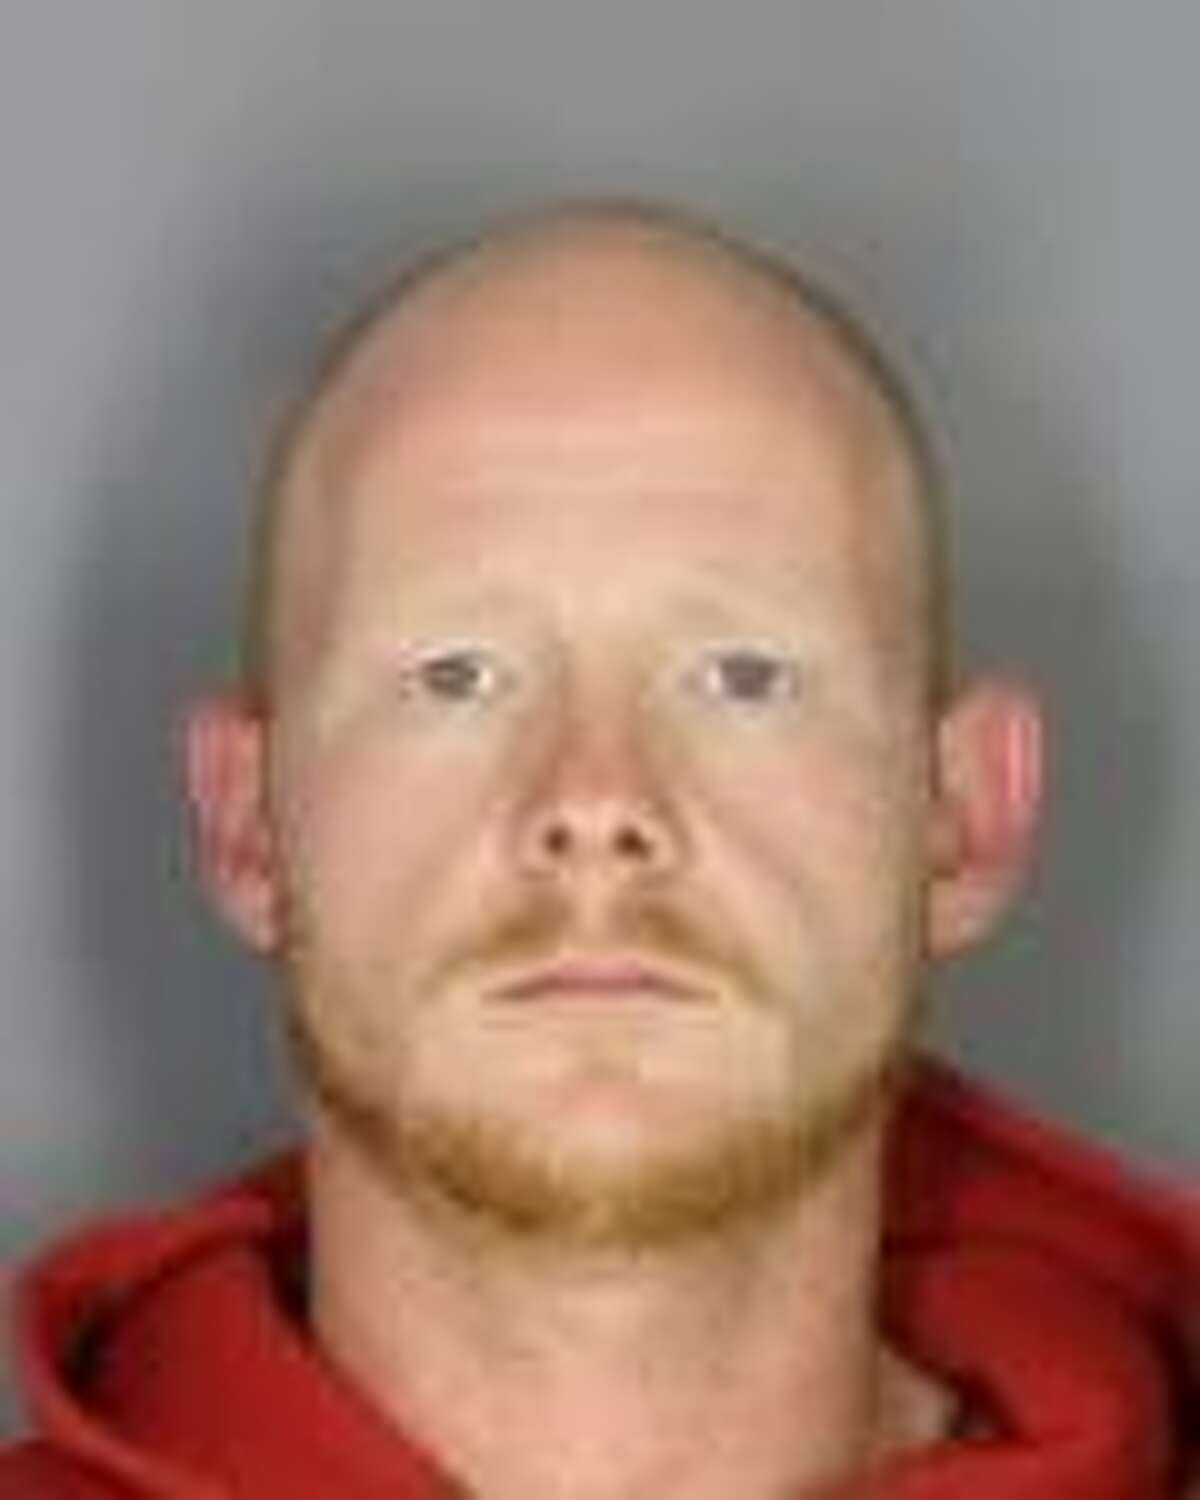 Berne Man Charged With Raping 13 Year Old Girl